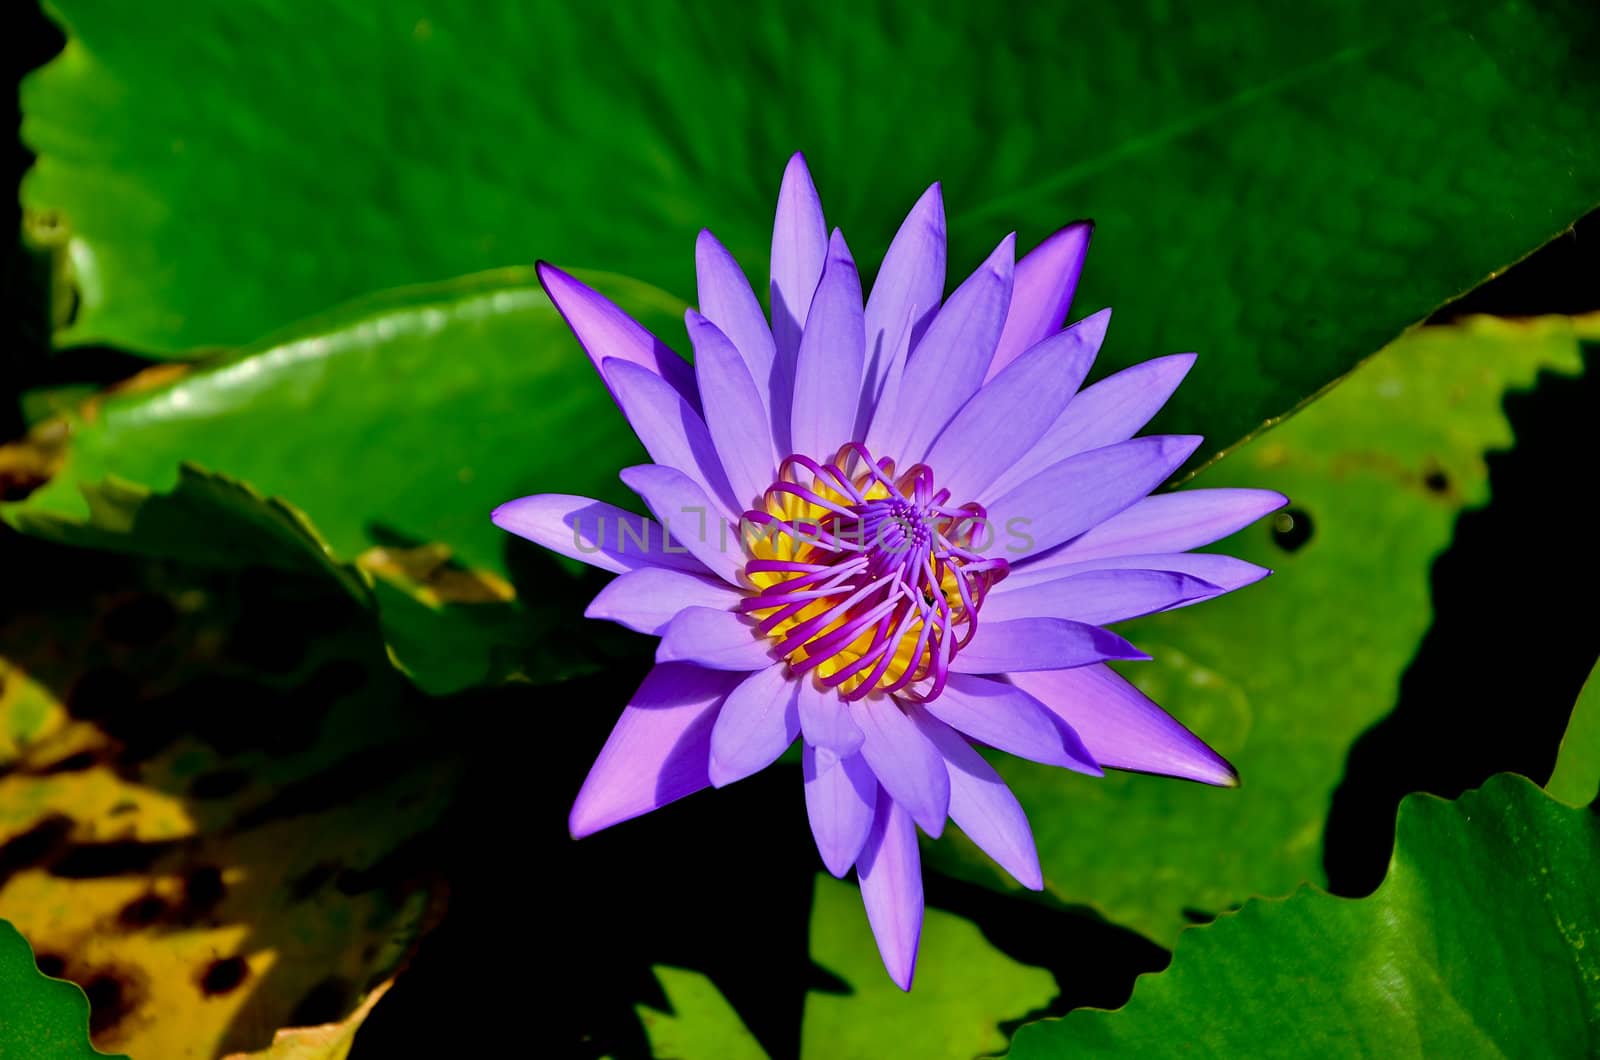 Water lily by raweenuttapong